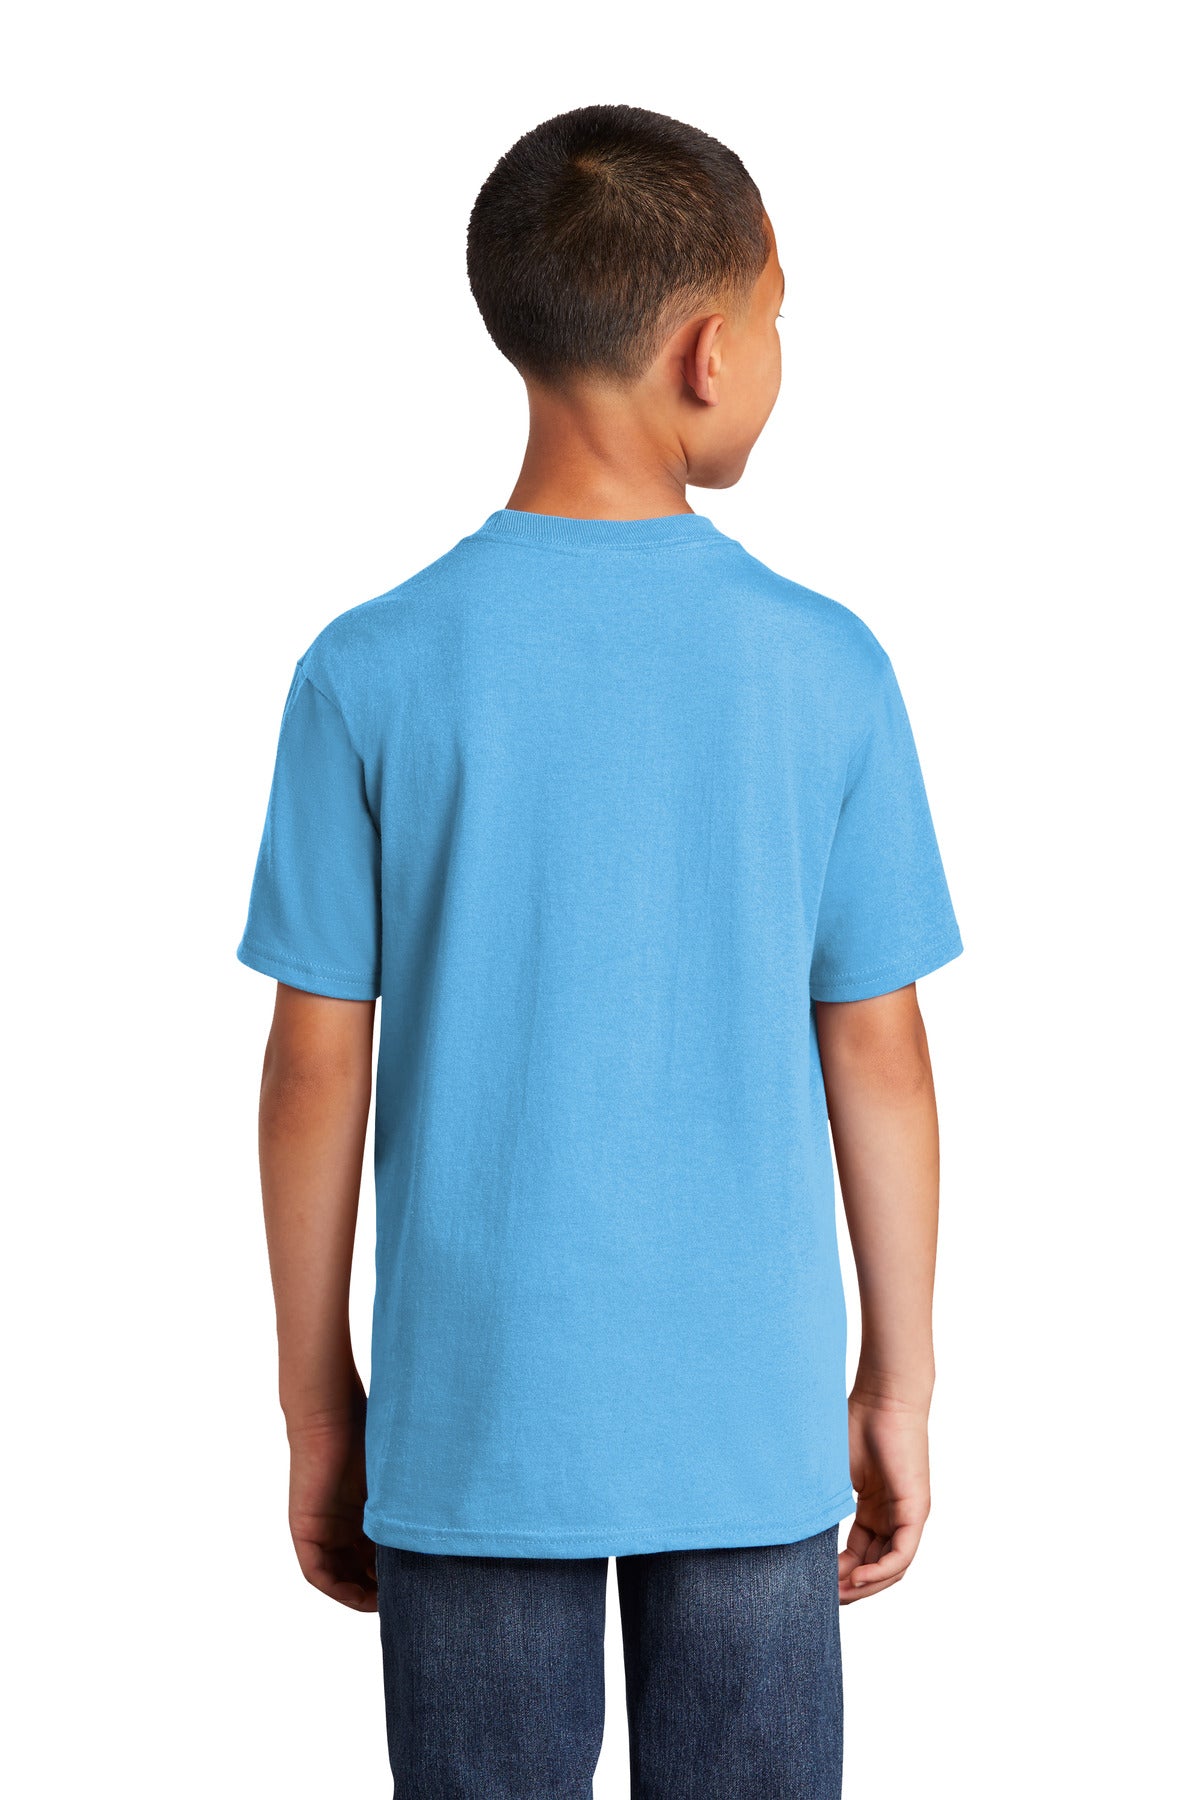 Port & Company® Youth Core Cotton DTG Tee PC54YDTG - DFW Impression